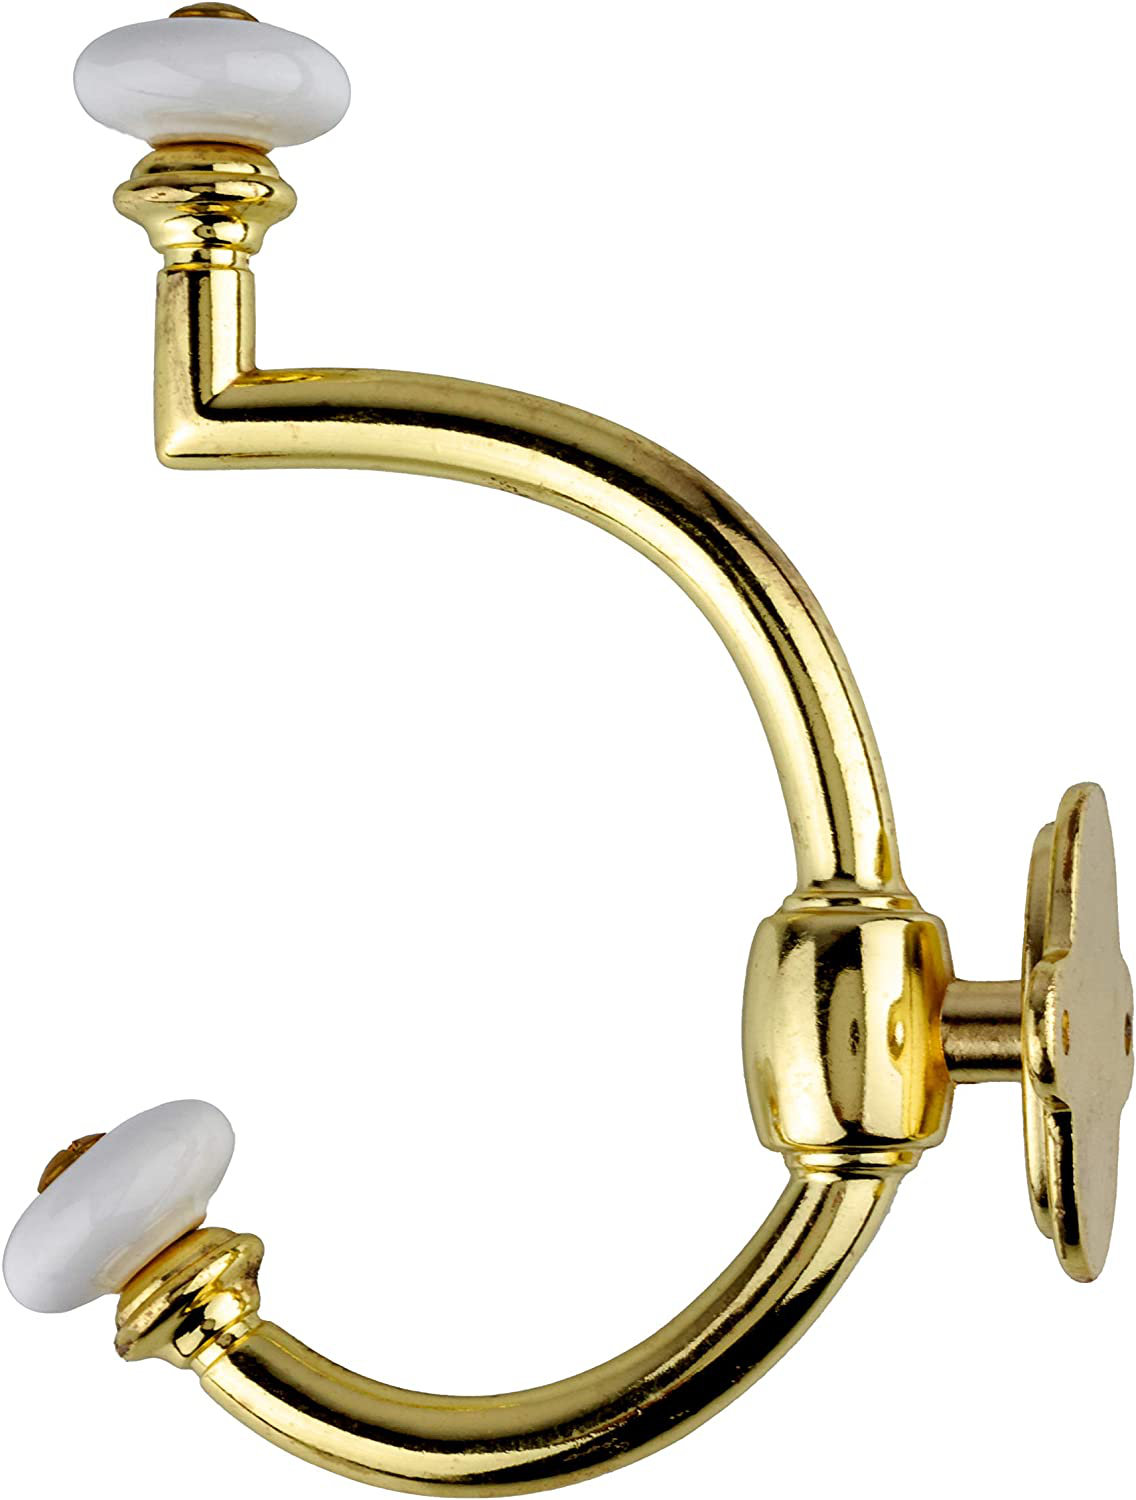 UNIQANTIQ HARDWARE SUPPLY Brass Plated With Ceramic Ball Hat And Coat Hall  Tree Hook - Wayfair Canada